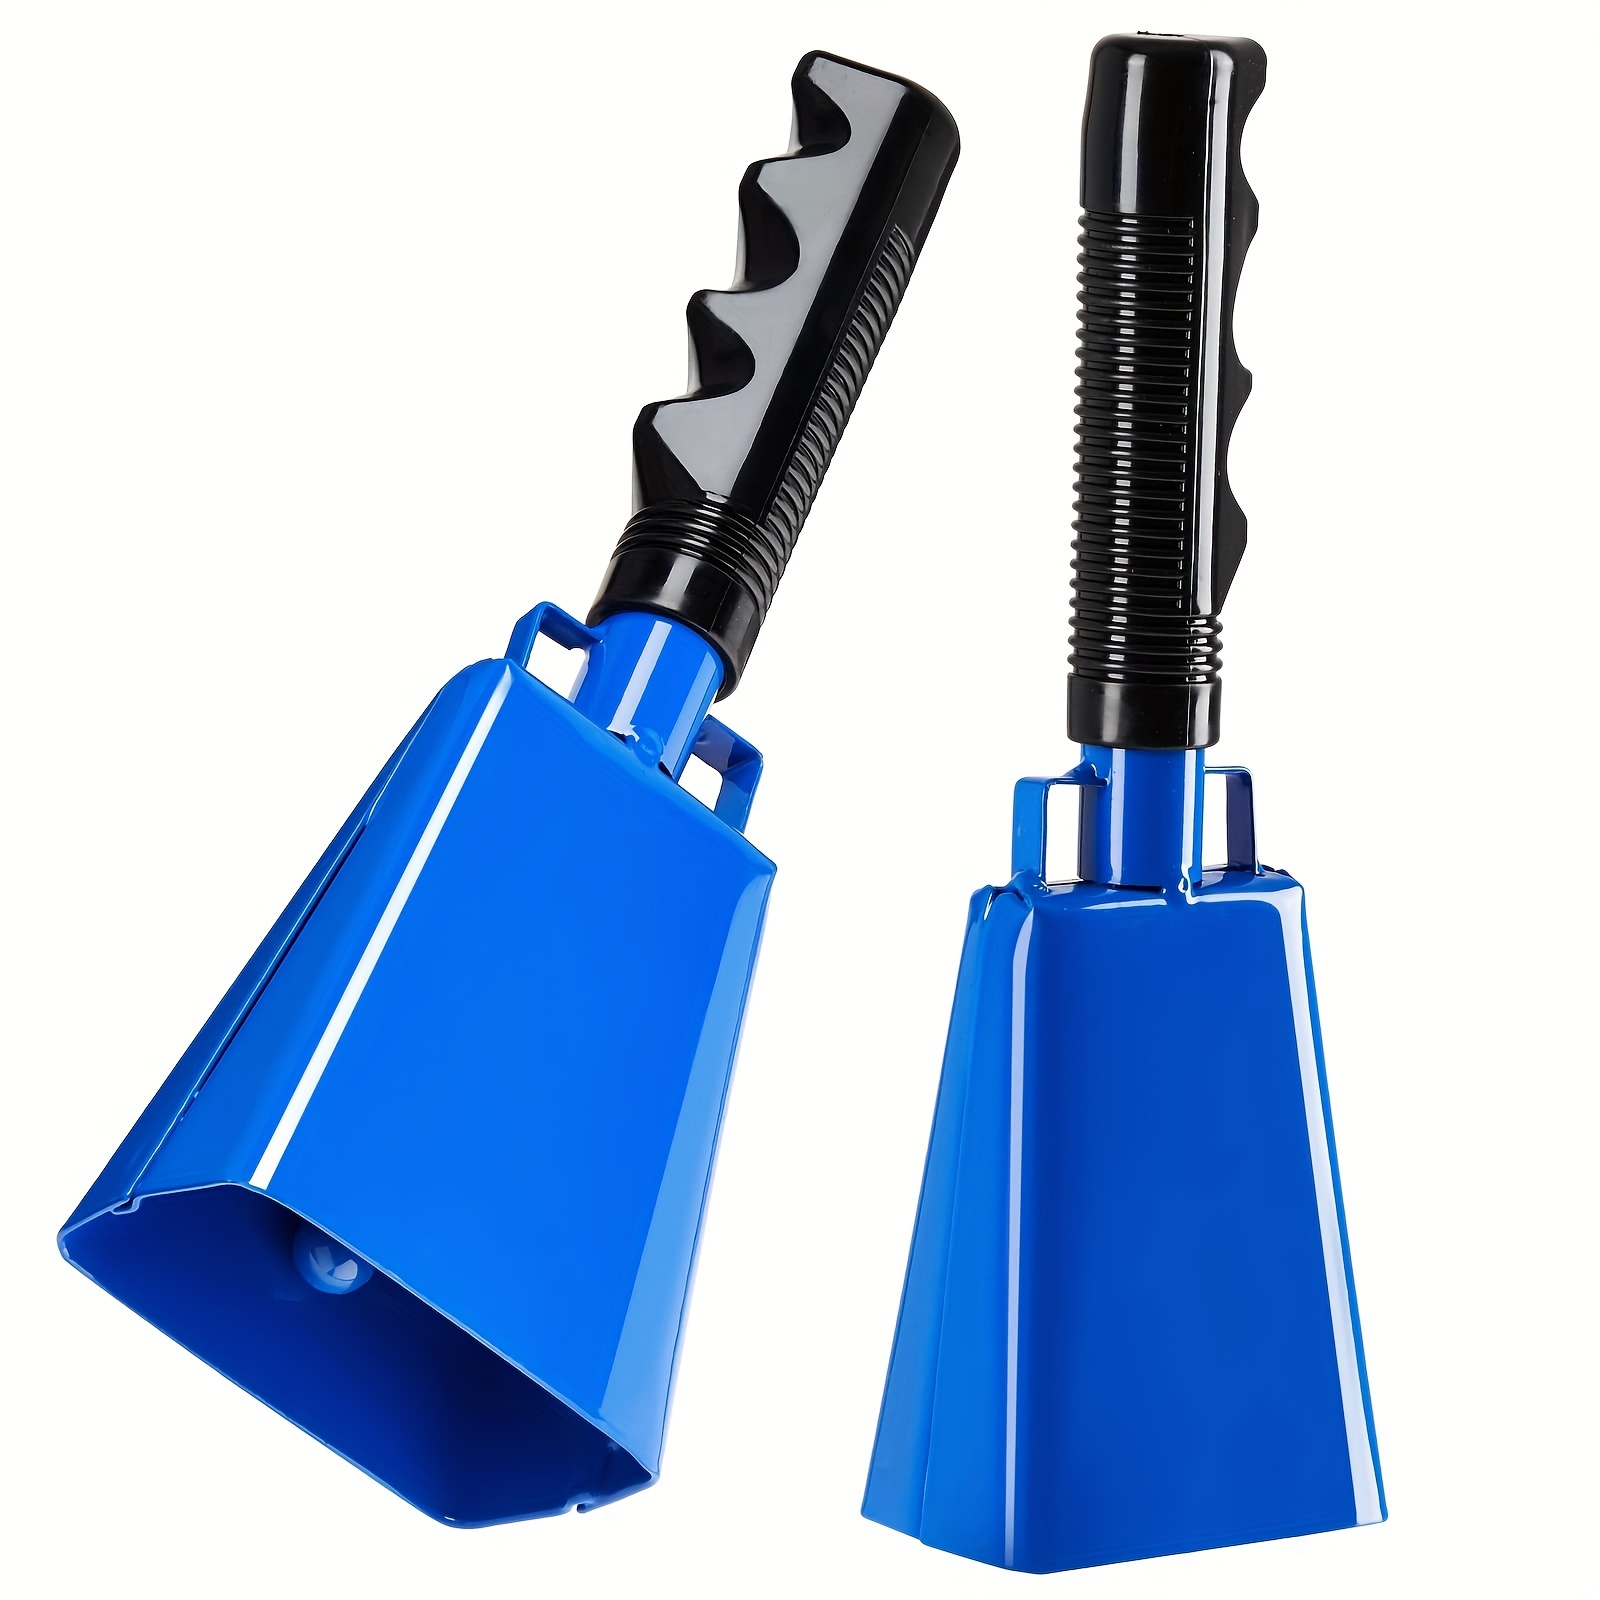 Large Cowbells - Cowbells For Sporting Events